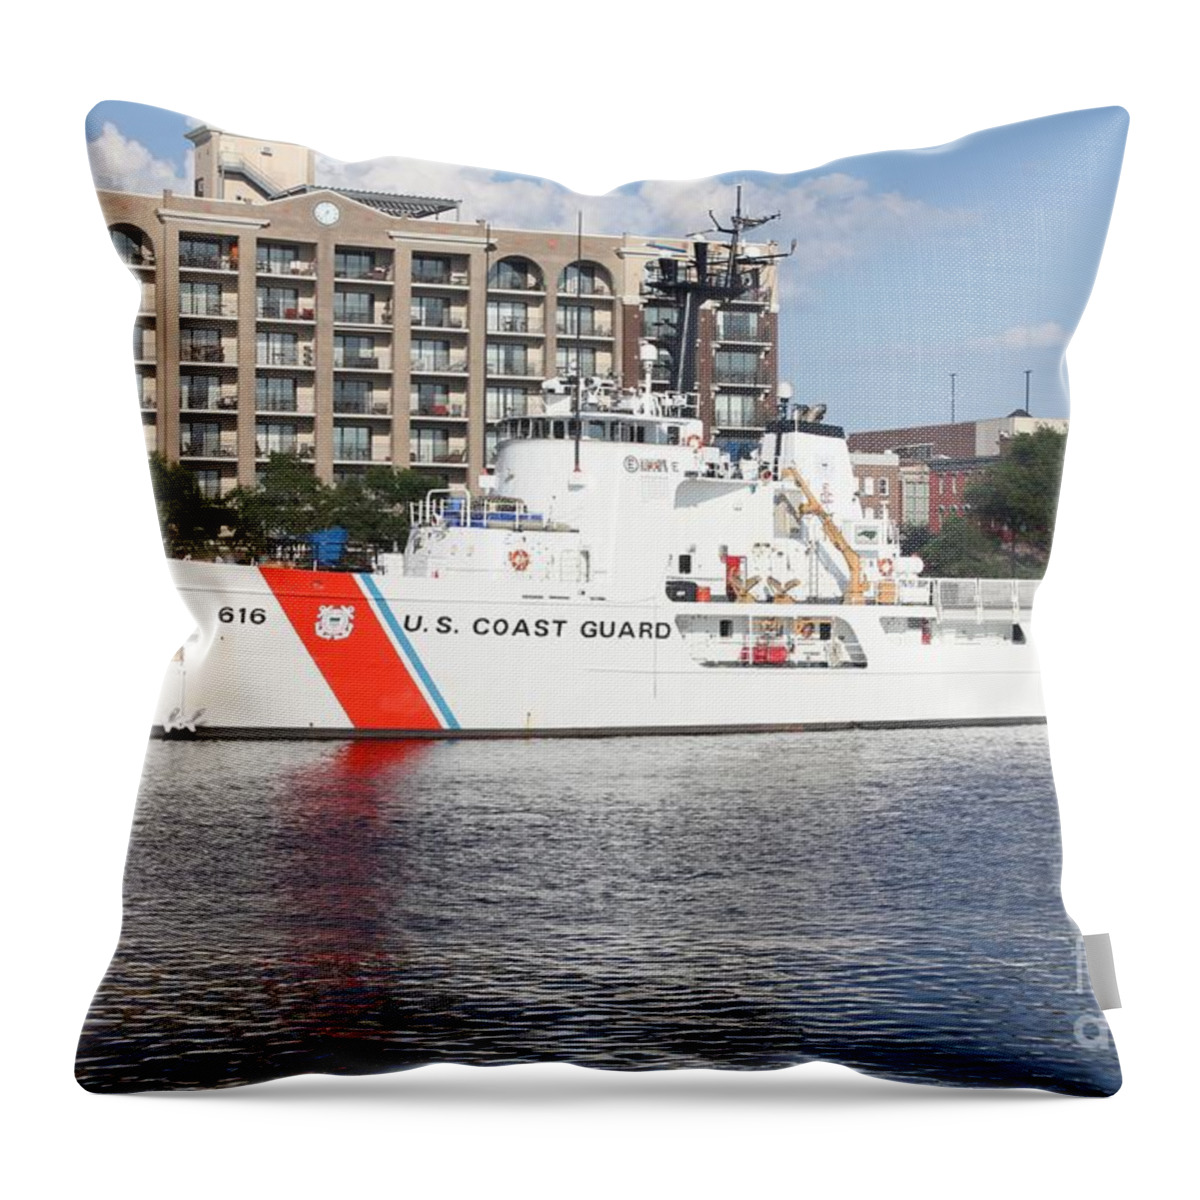 Us Coast Guard On Cape Fear River Throw Pillow featuring the photograph Us Coast Guard On Cape Fear River by John Telfer